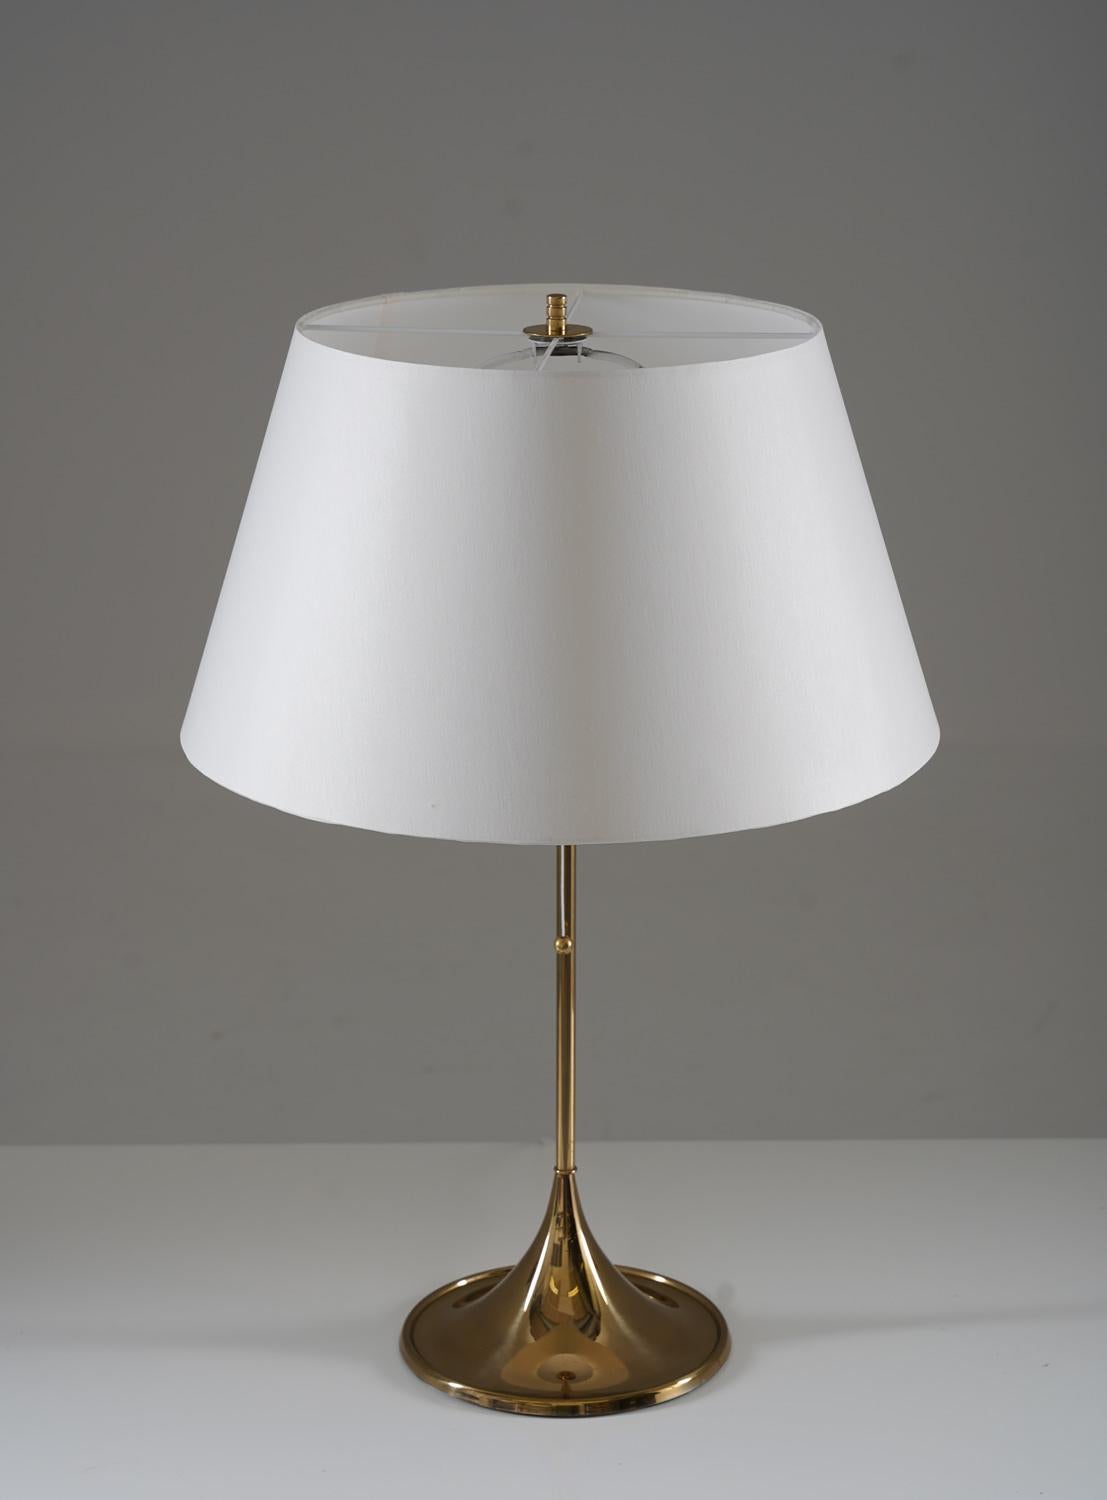 Midcentury table lamps in brass model B-024 by Alf Svensson and Yngvar Sandström for Bergboms, Sweden
The lamps are made of solid brass with a trumpet-shaped foot. 
Condition: Very good condition with signs of age and use. New shades.